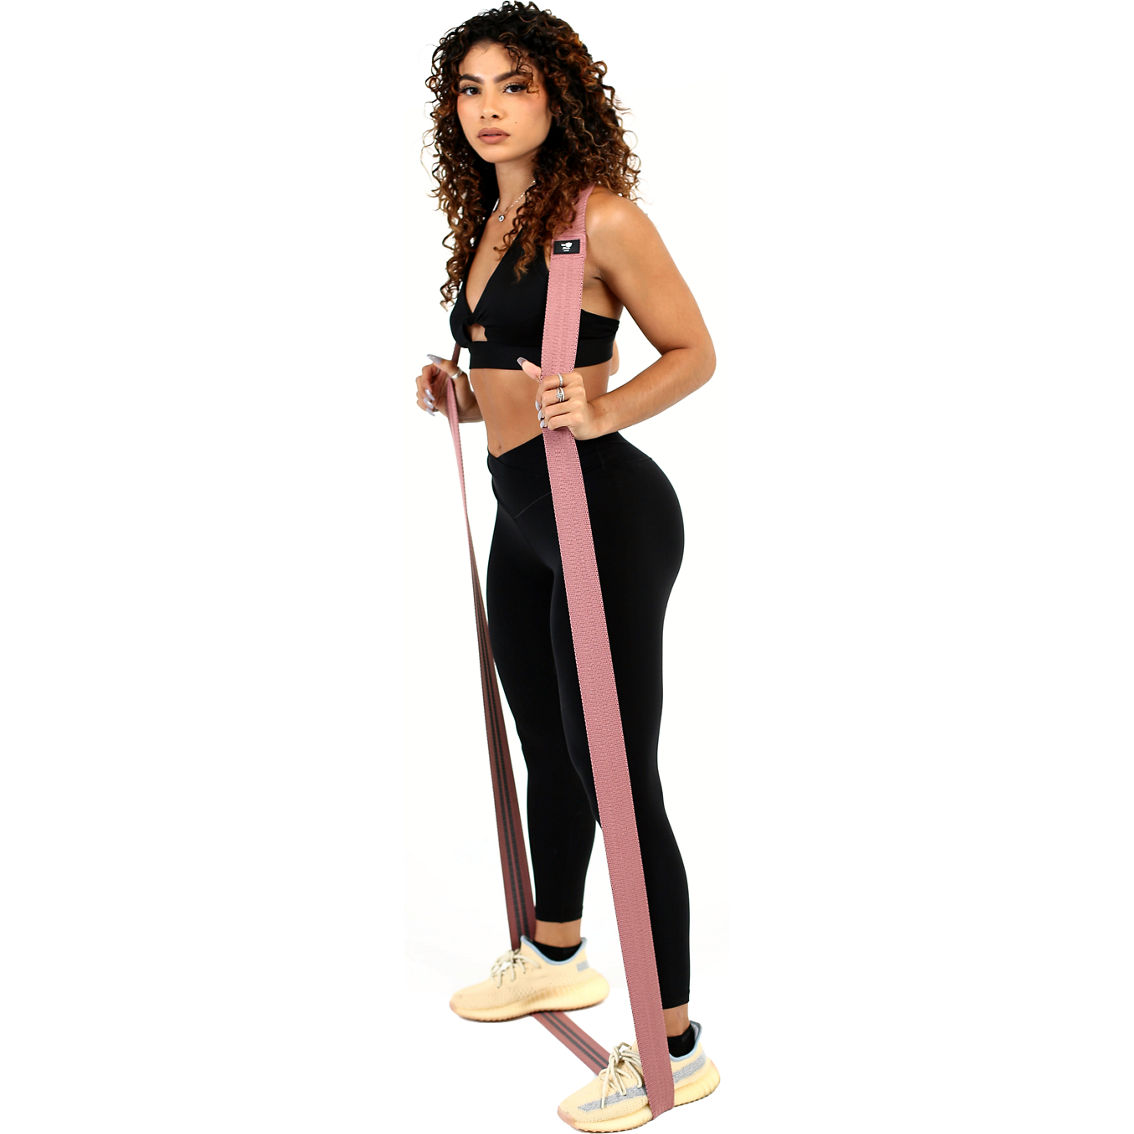 WeCare Fitness Full-Body Workout Resistance Bands 4 pk. - Image 8 of 10